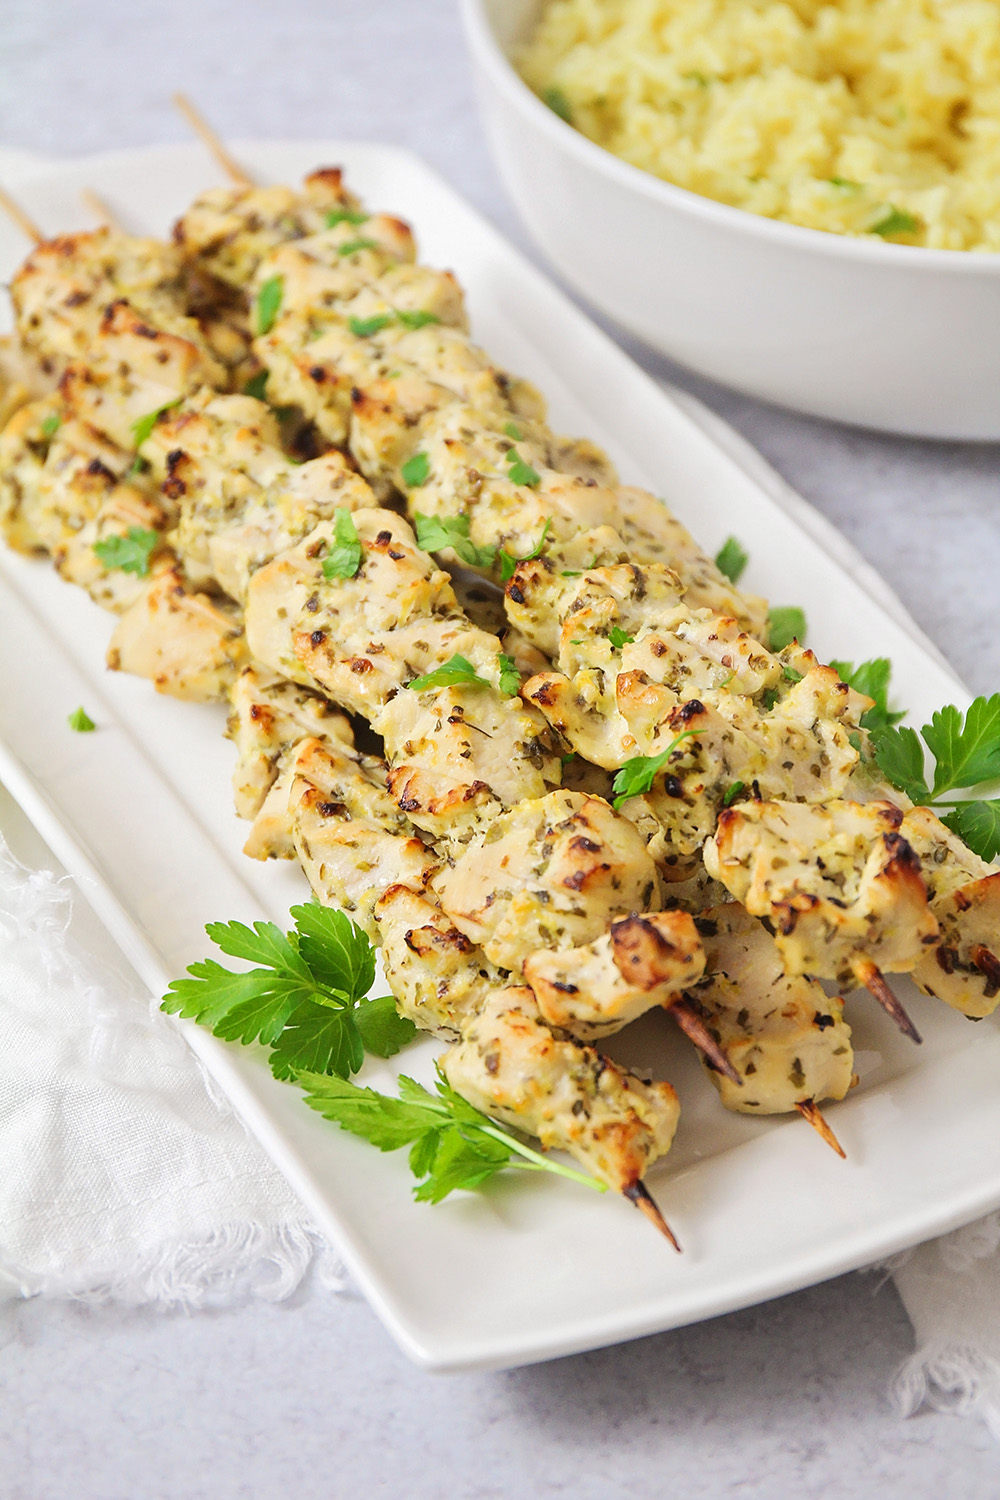 These savory and flavorful greek chicken skewers are an easy and delicious weeknight meal!